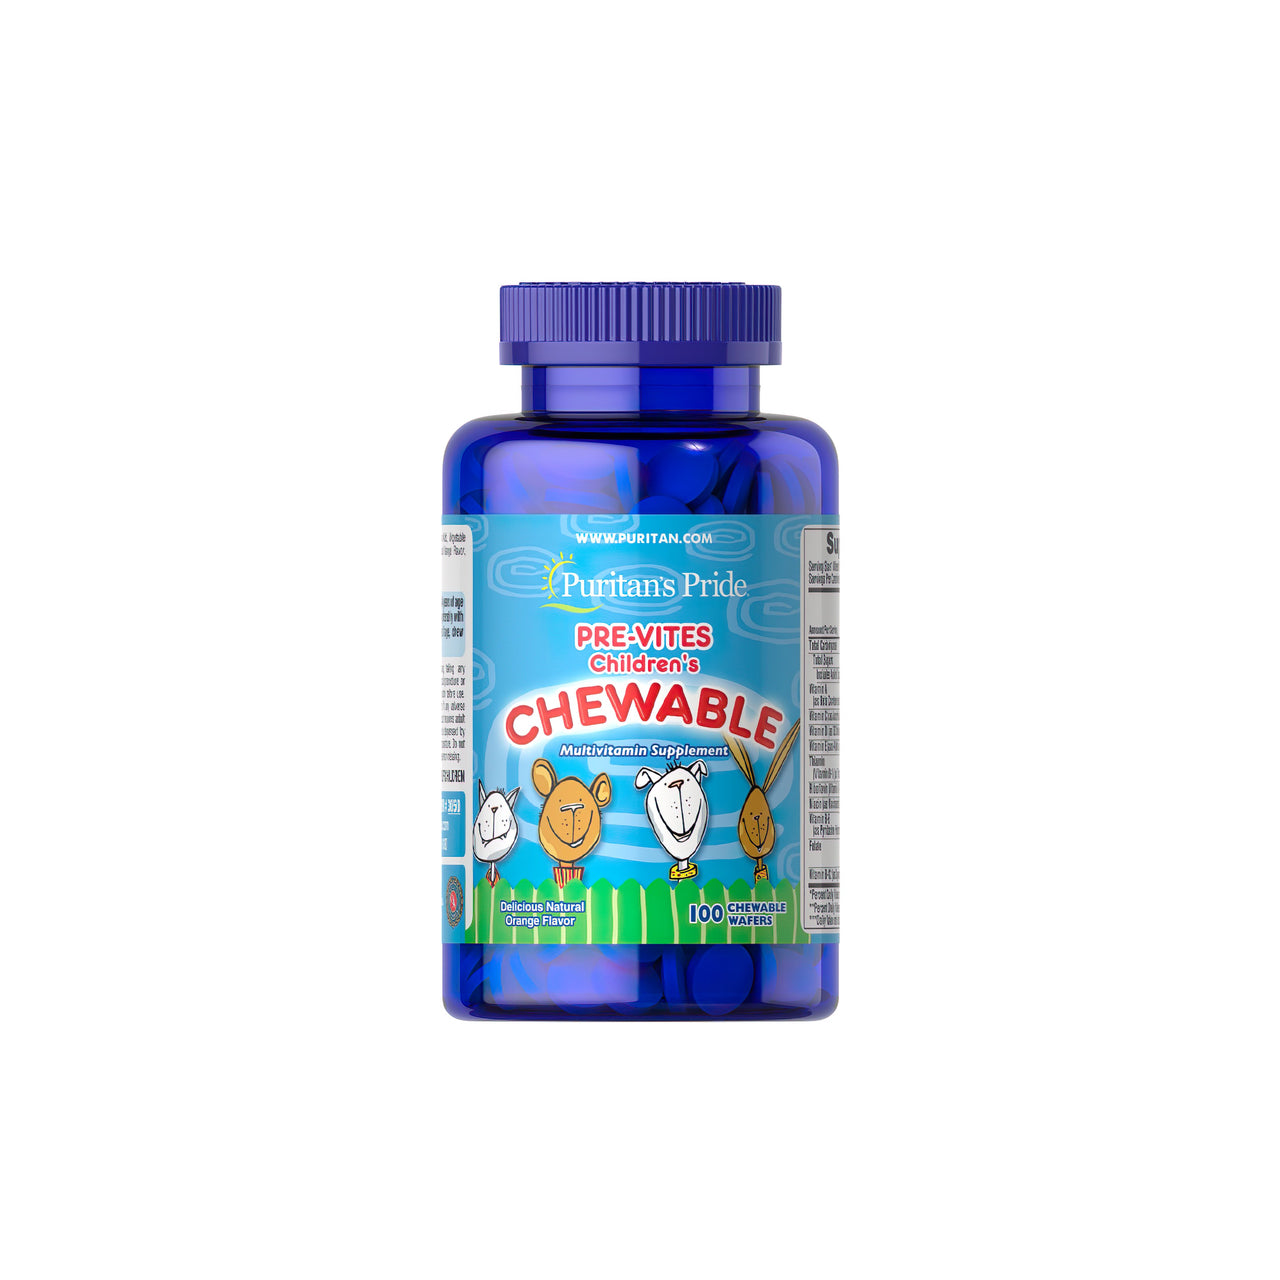 A bottle of PRE- Vites Chlidren's multivitamin 100 chewable wafers by Puritan's Pride with essential vitamins.